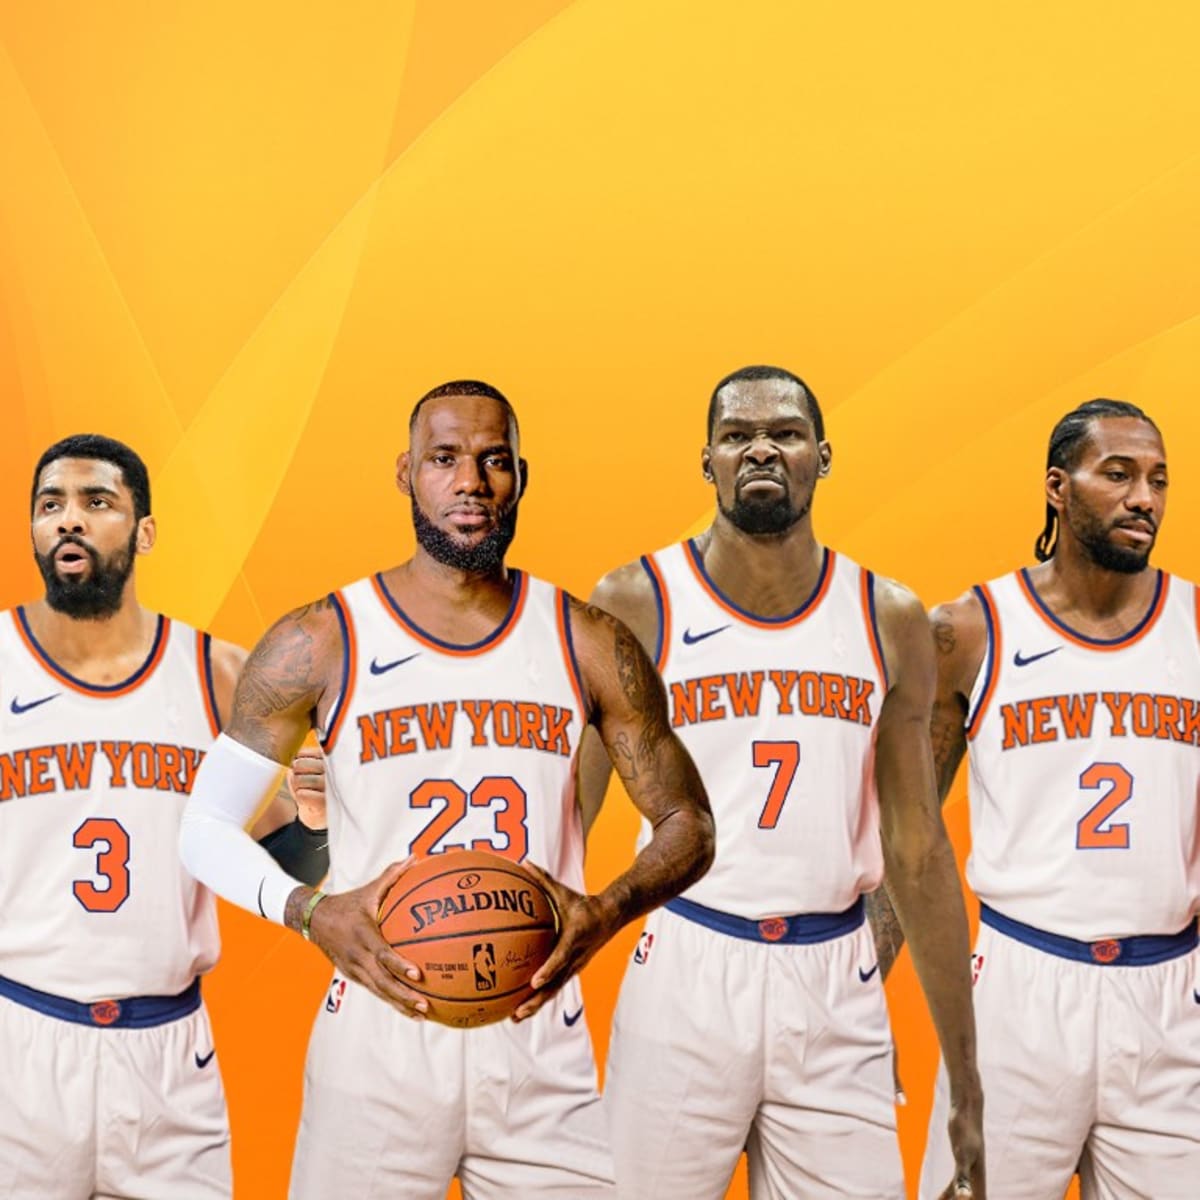 With Players Joking That Orange Is Causing Their Blues, Knicks